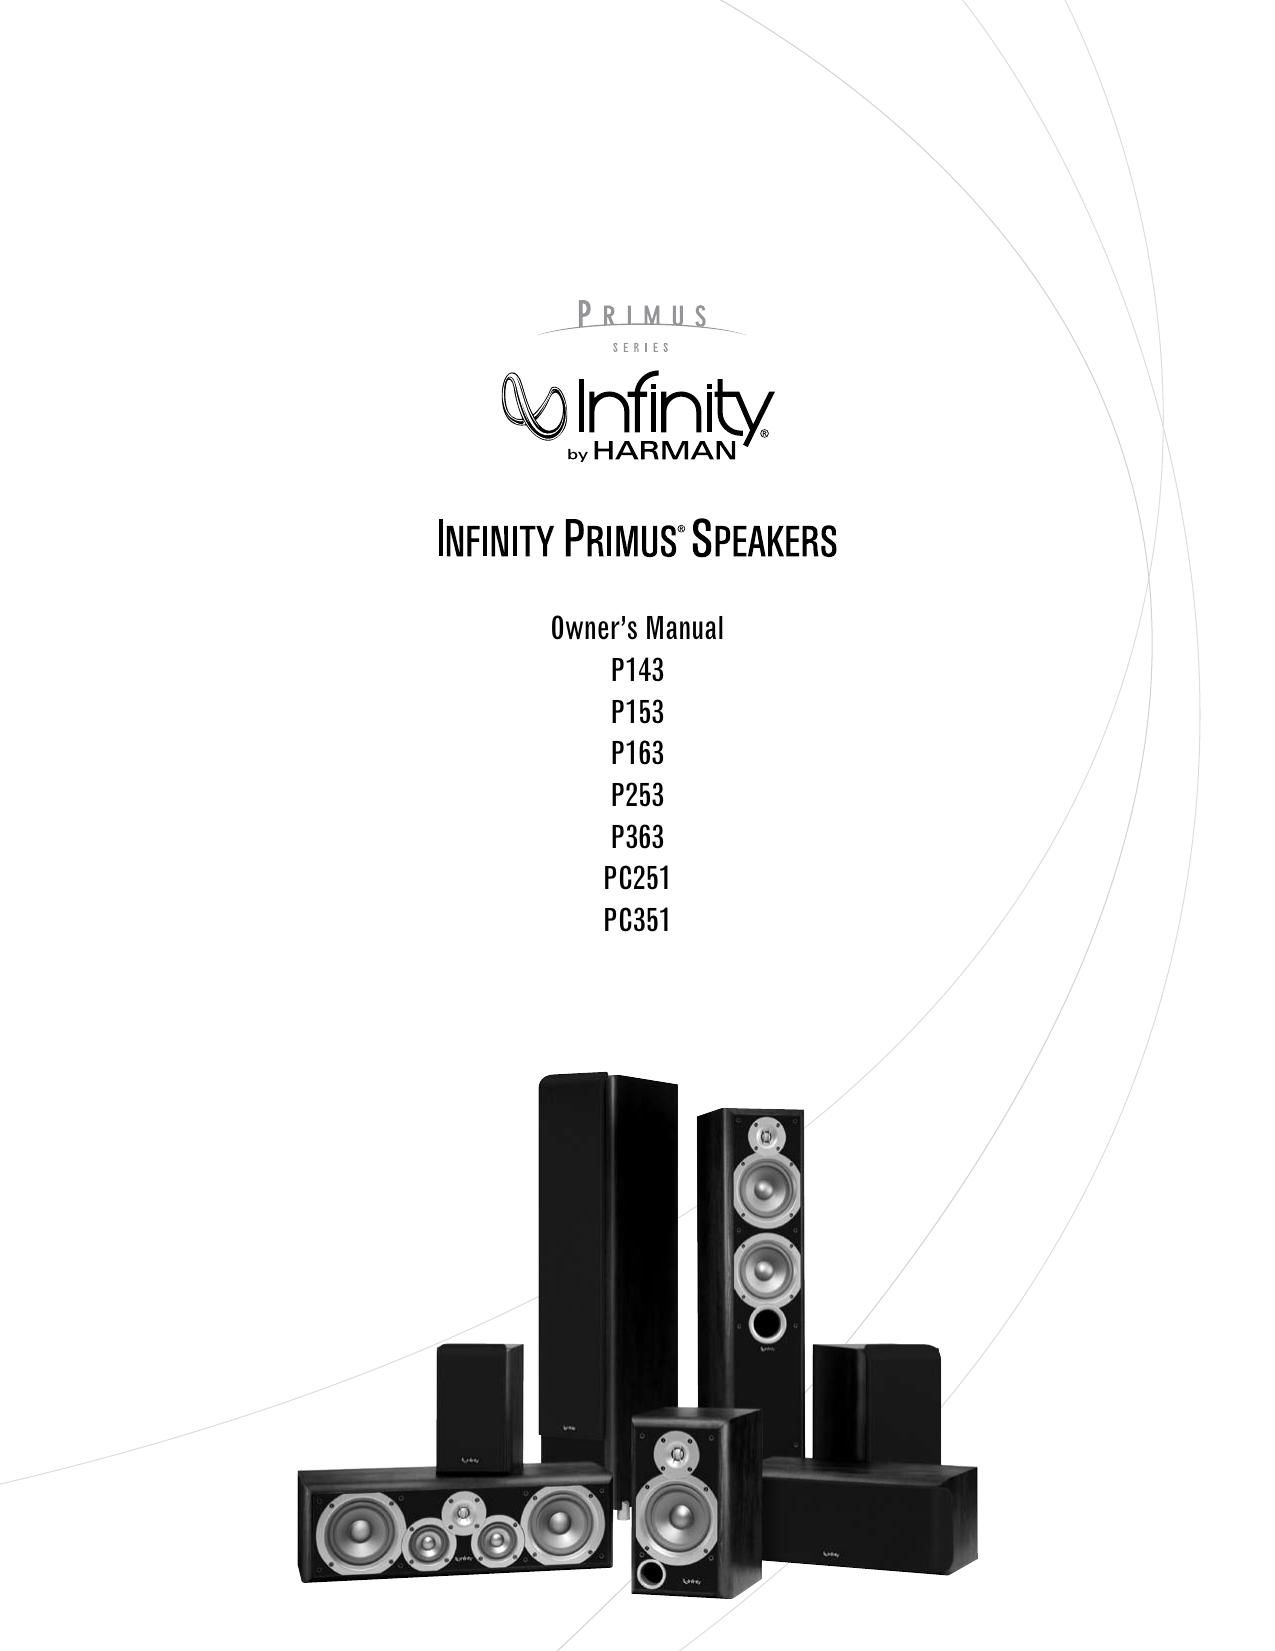 Infinity Primus P 363 Owners Manual